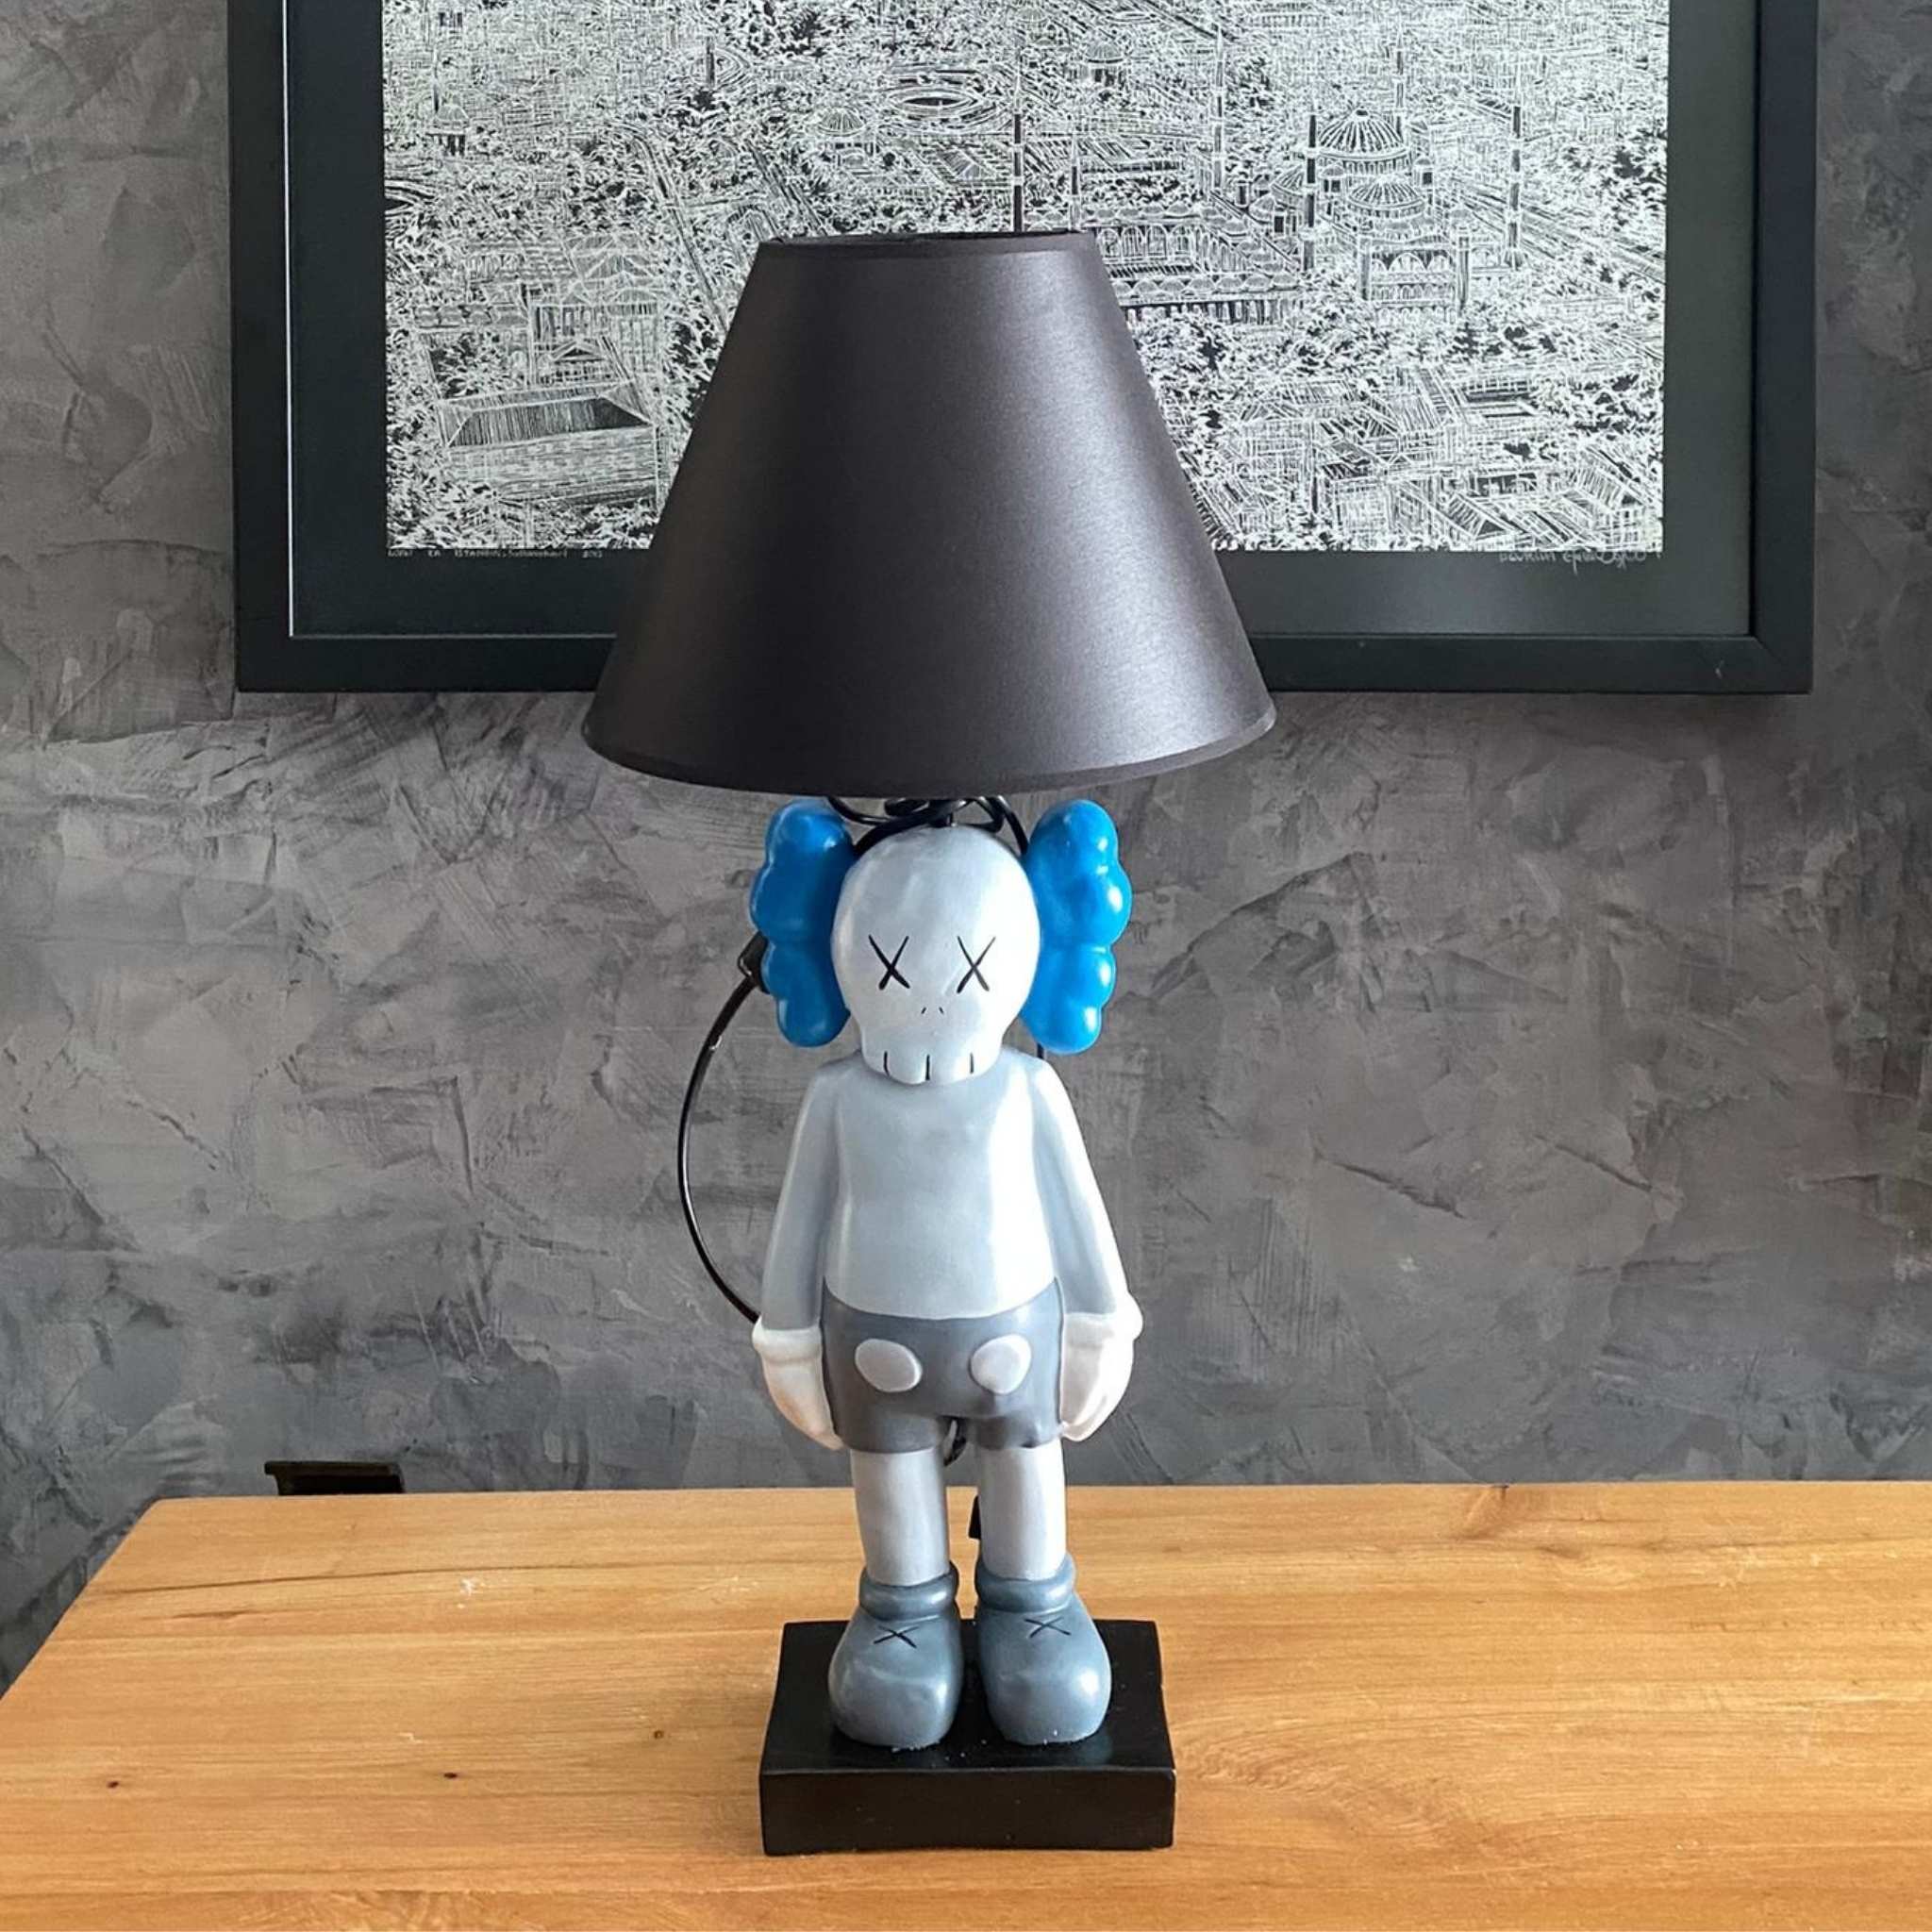 Illuminated Blue & Grey: The KAWS Sculpture with Lampshade